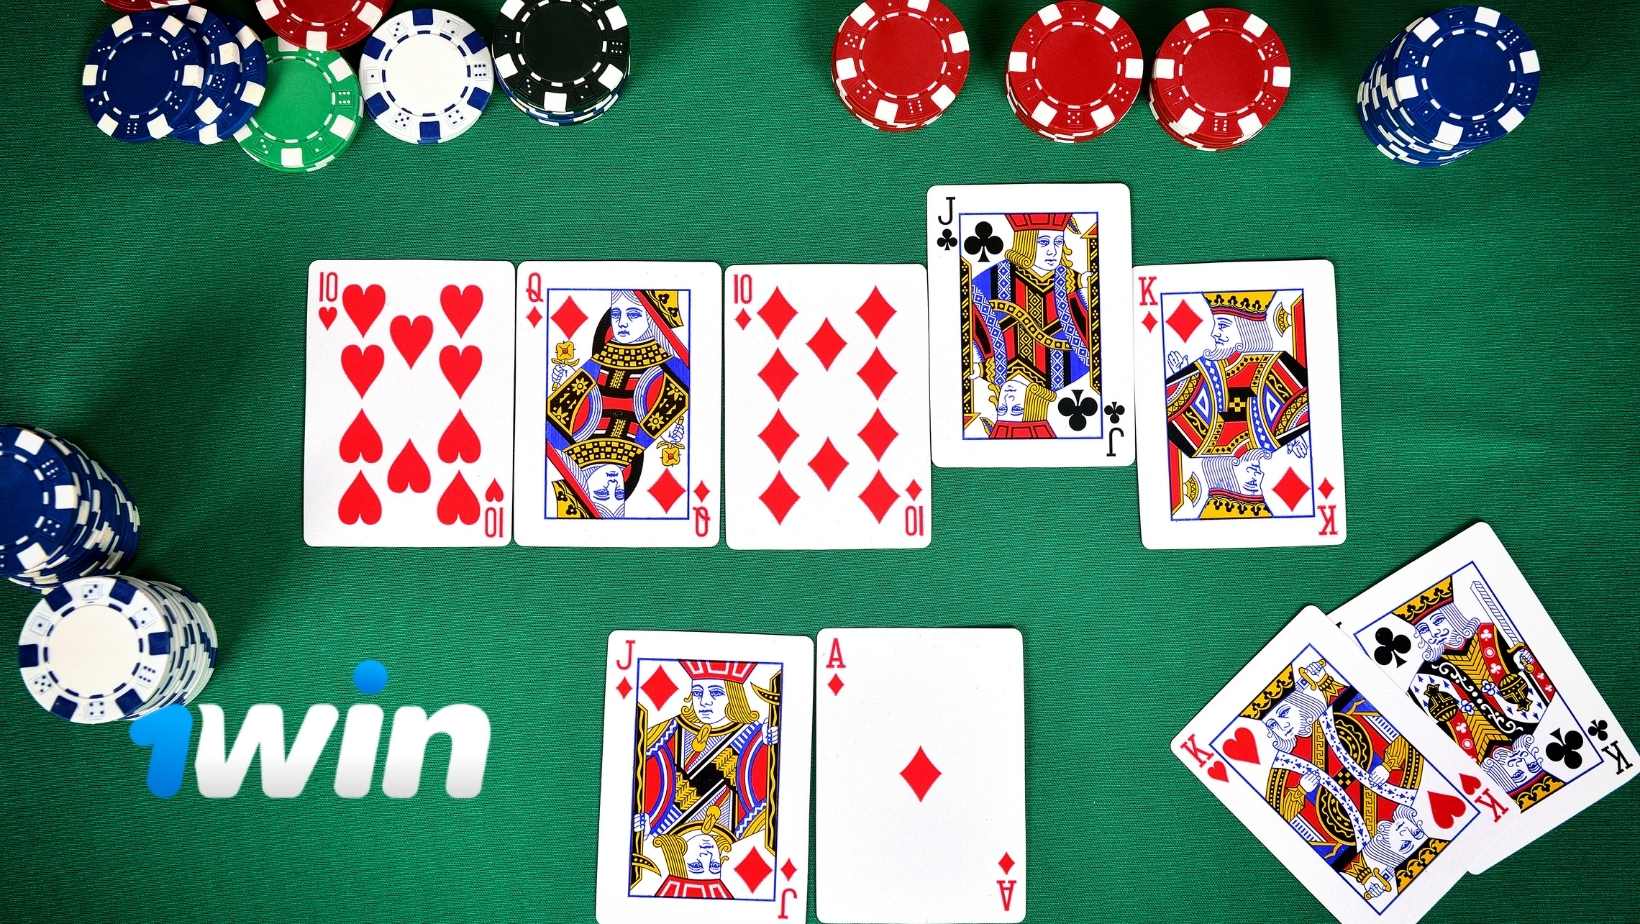 Types of poker games 1win